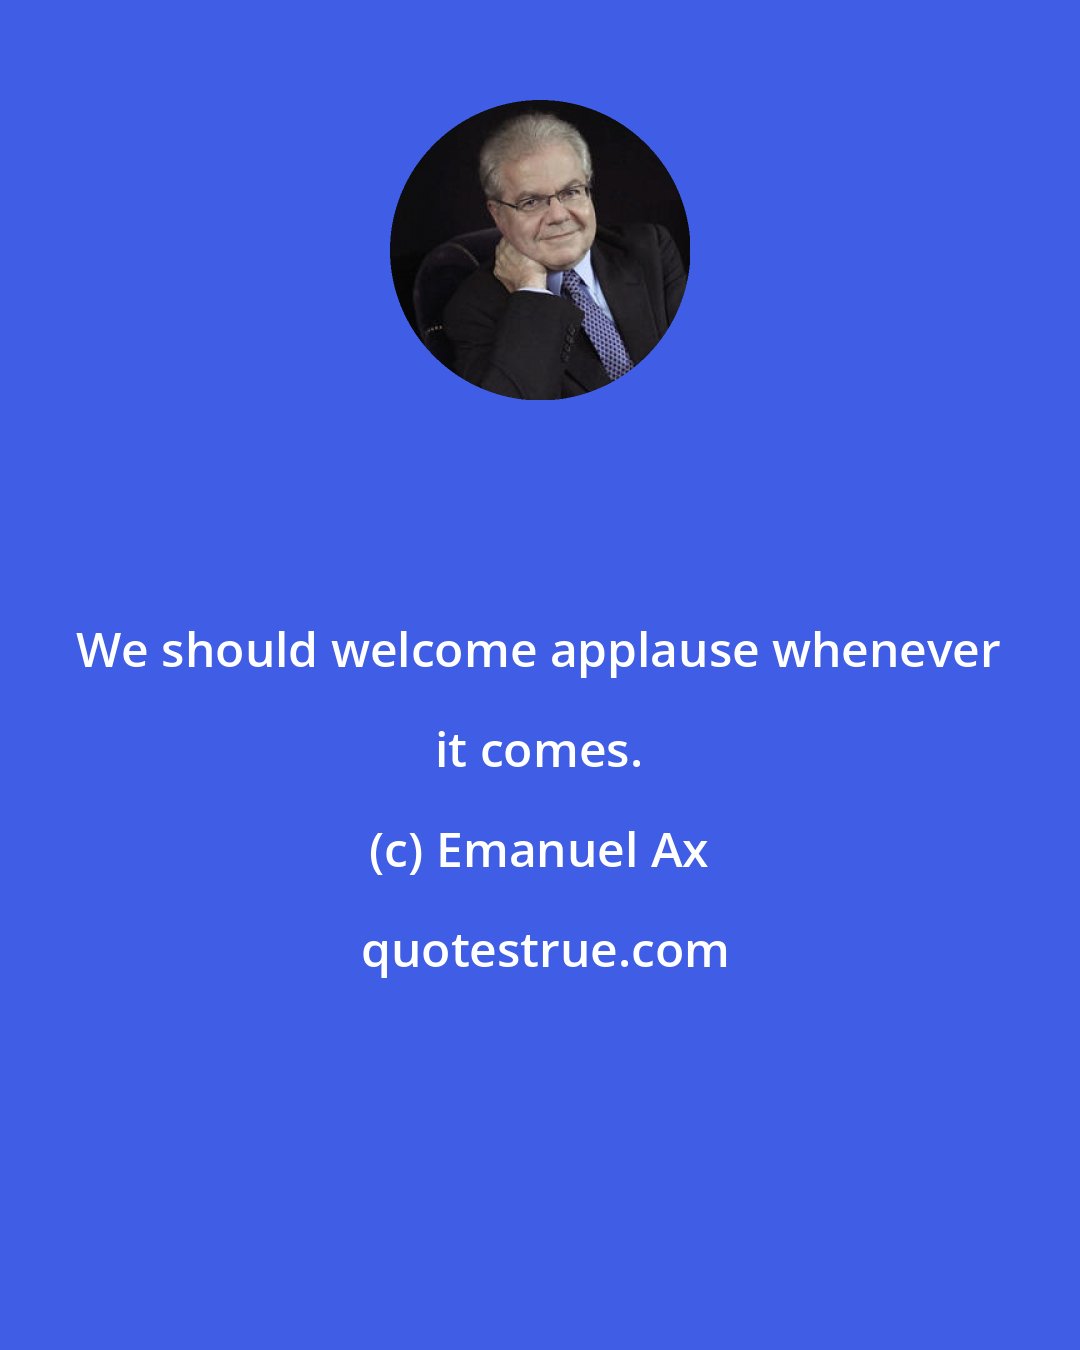 Emanuel Ax: We should welcome applause whenever it comes.